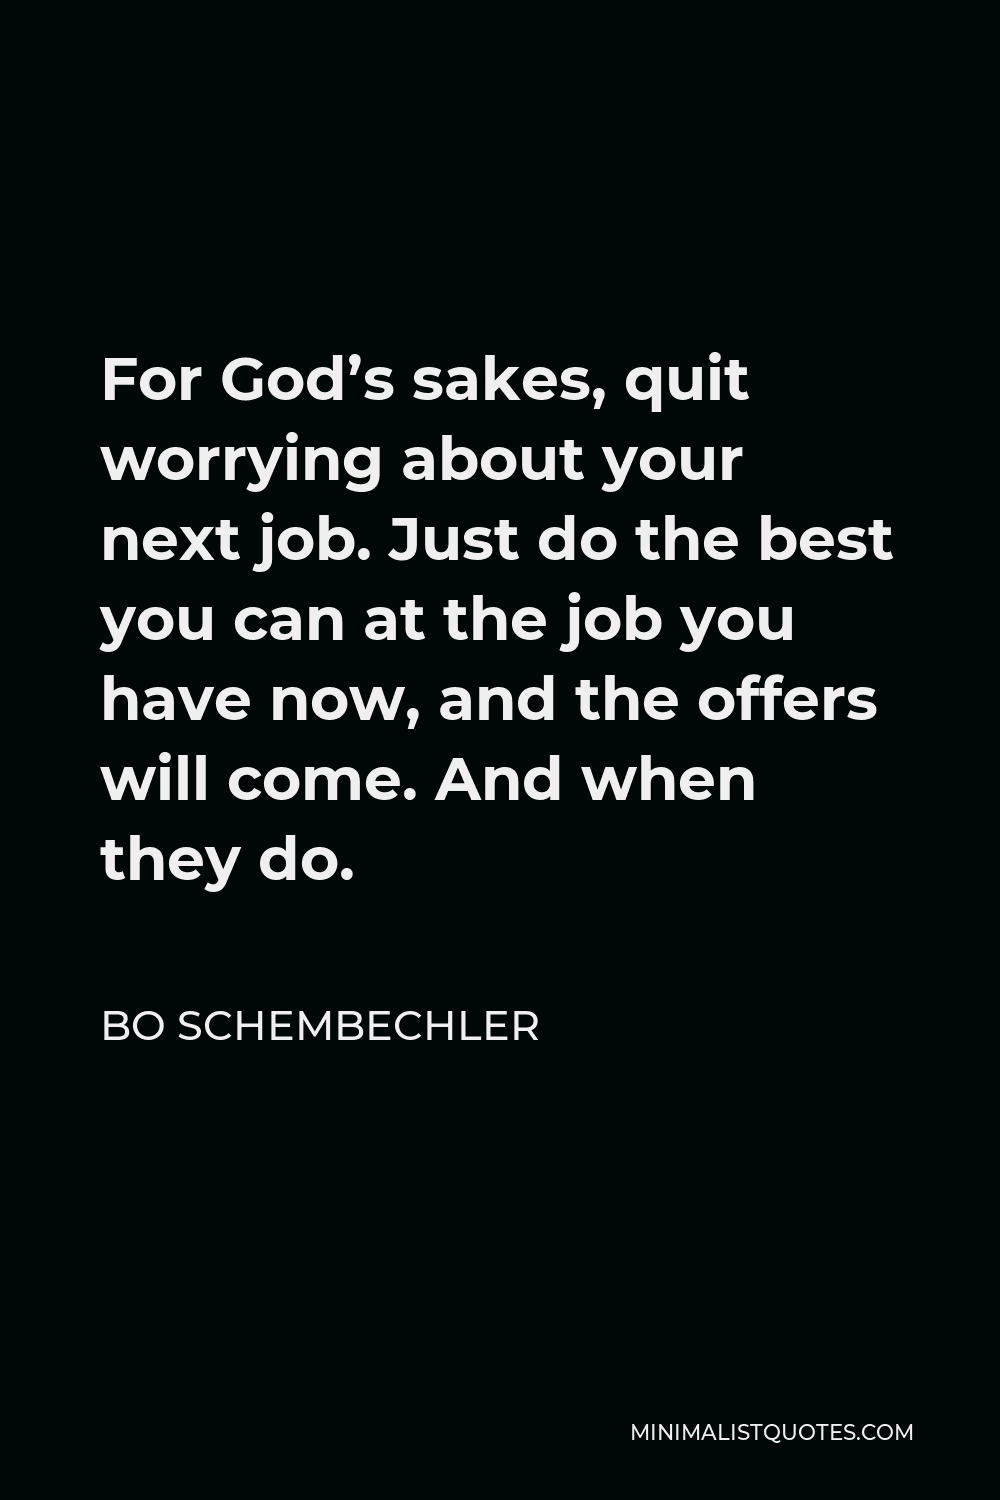 Bo Schembechler Quote - For God’s sakes, quit worrying about your next job. Just do the best you can at the job you have now, and the offers will come. And when they do.